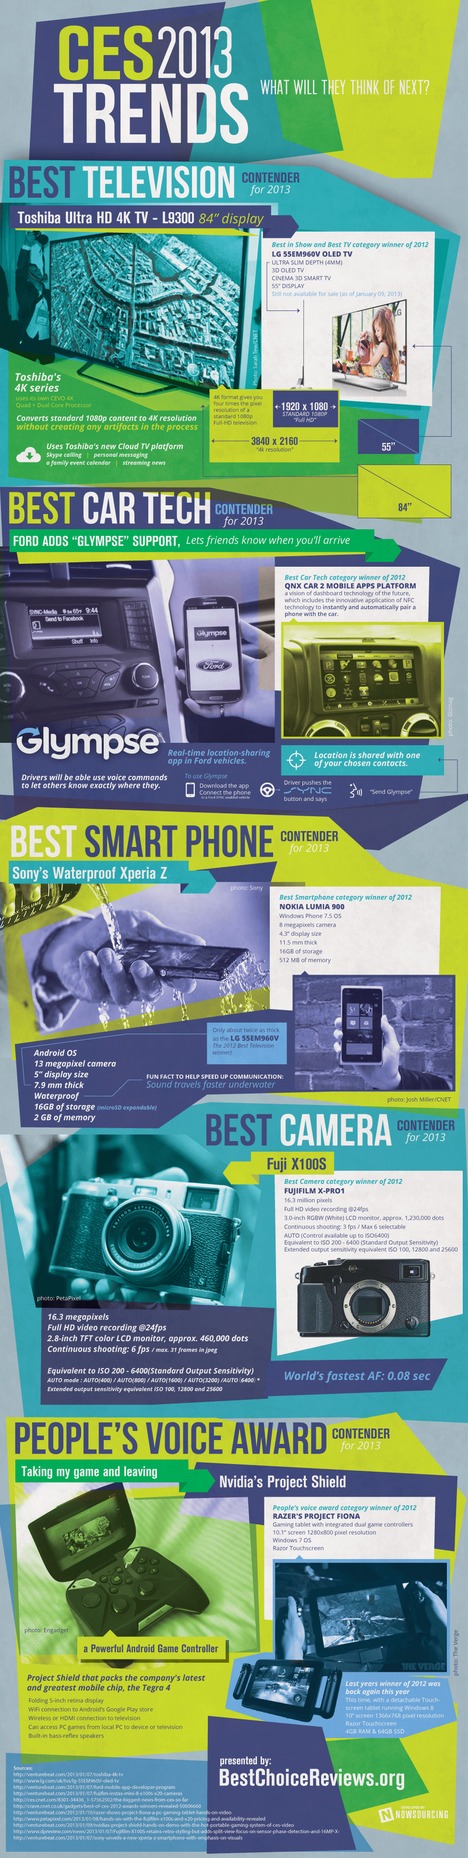 CES Trends 2013 (Infographic)